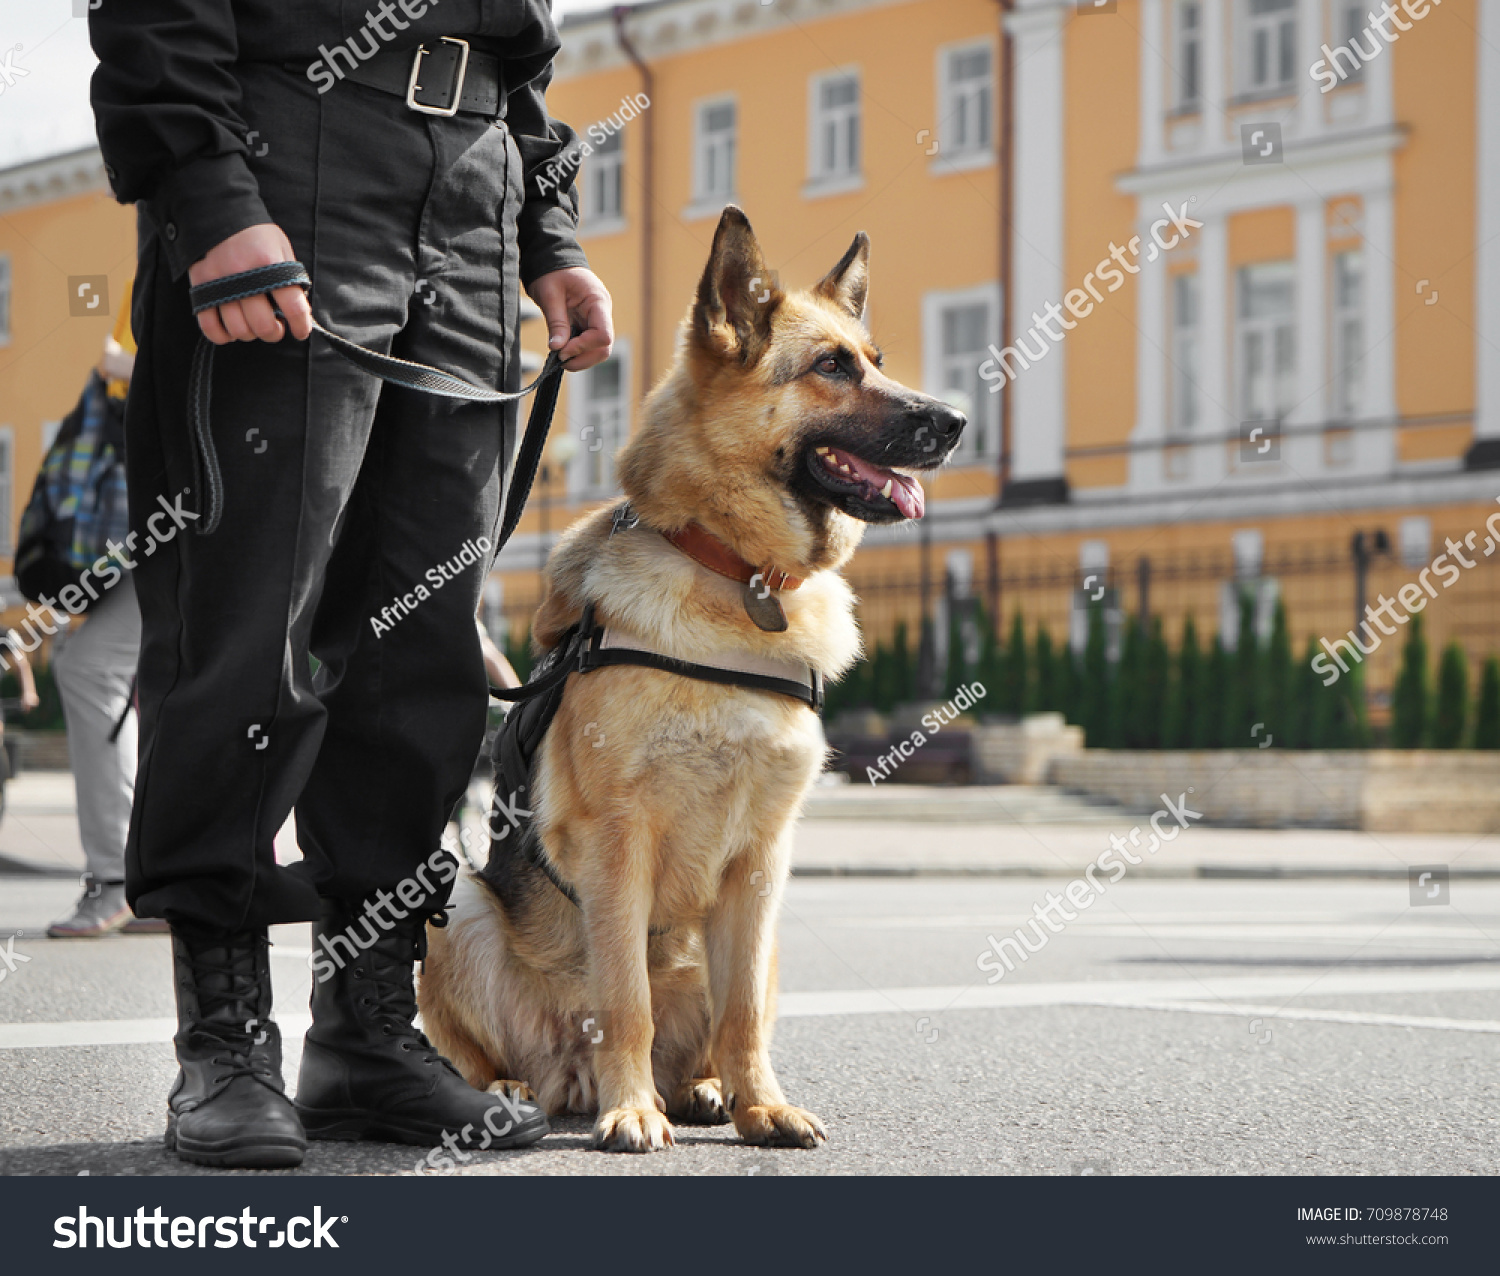 Smart police dog sitting outdoors #709878748